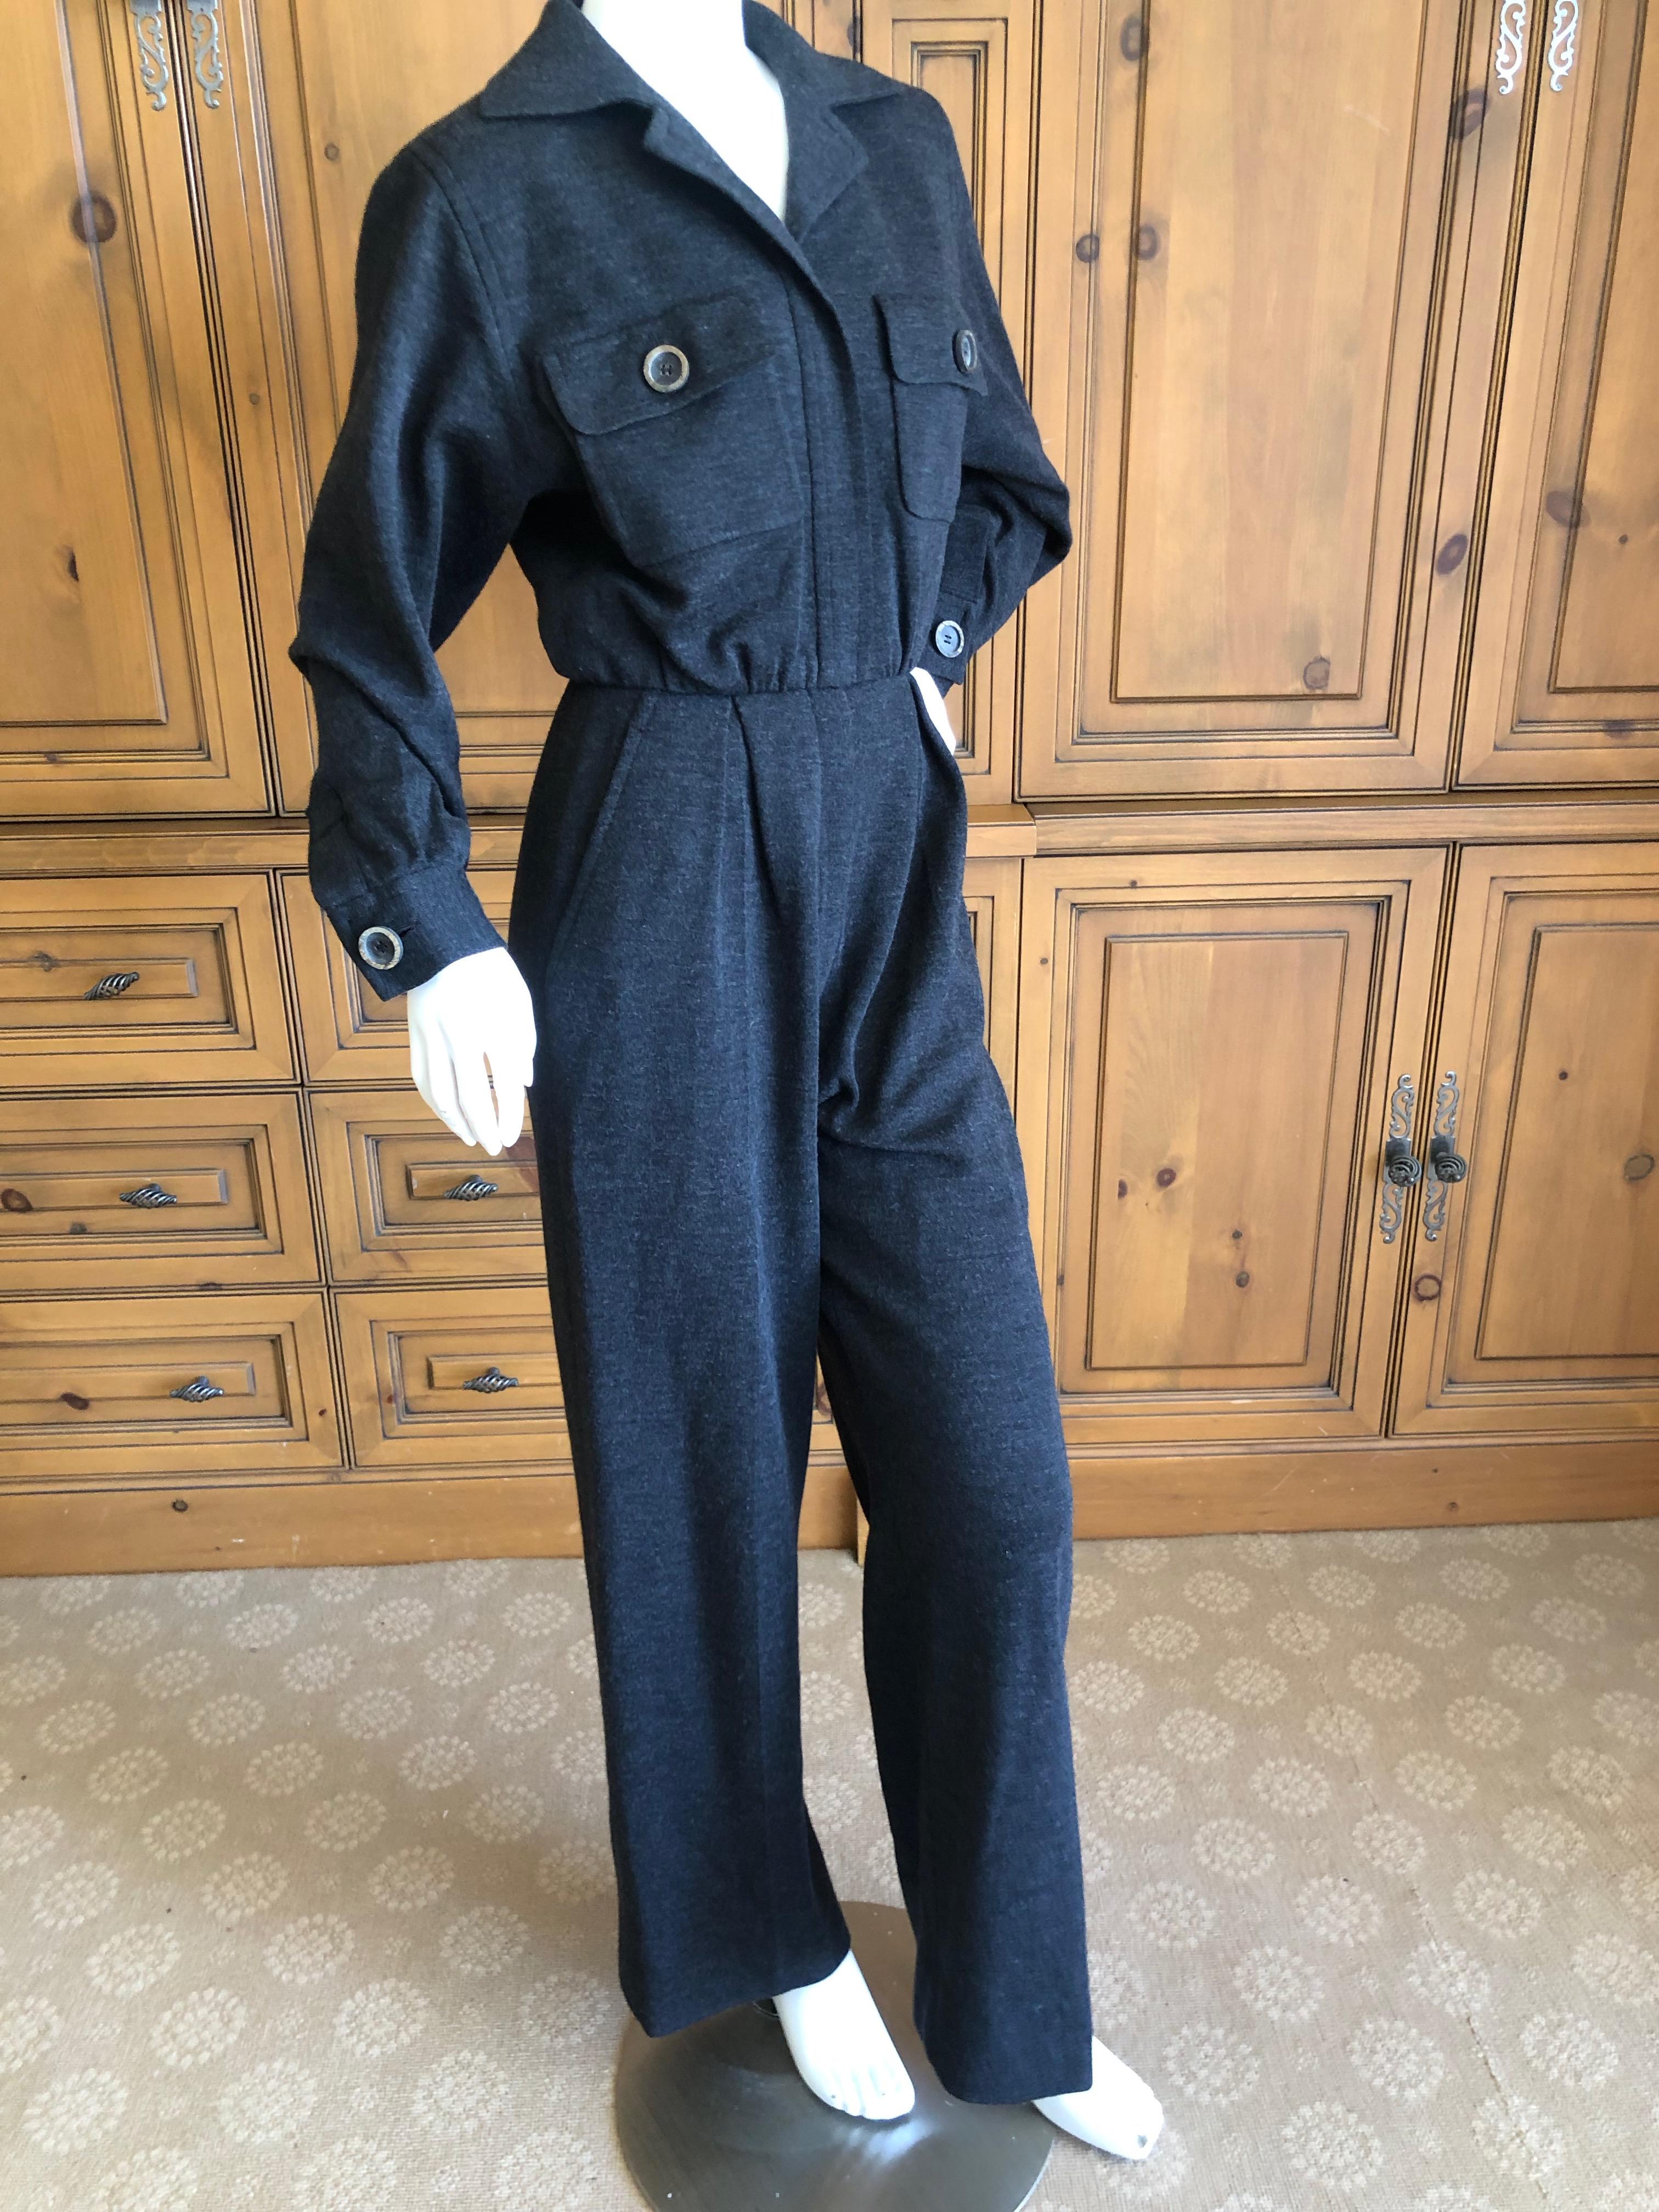 Yves Saint Laurent Rive Gauche 1970's Gray Jersey Jumpsuit 
The belt is for styling only, not included.
Partially lined
Size M-L No size tag
Bust 40